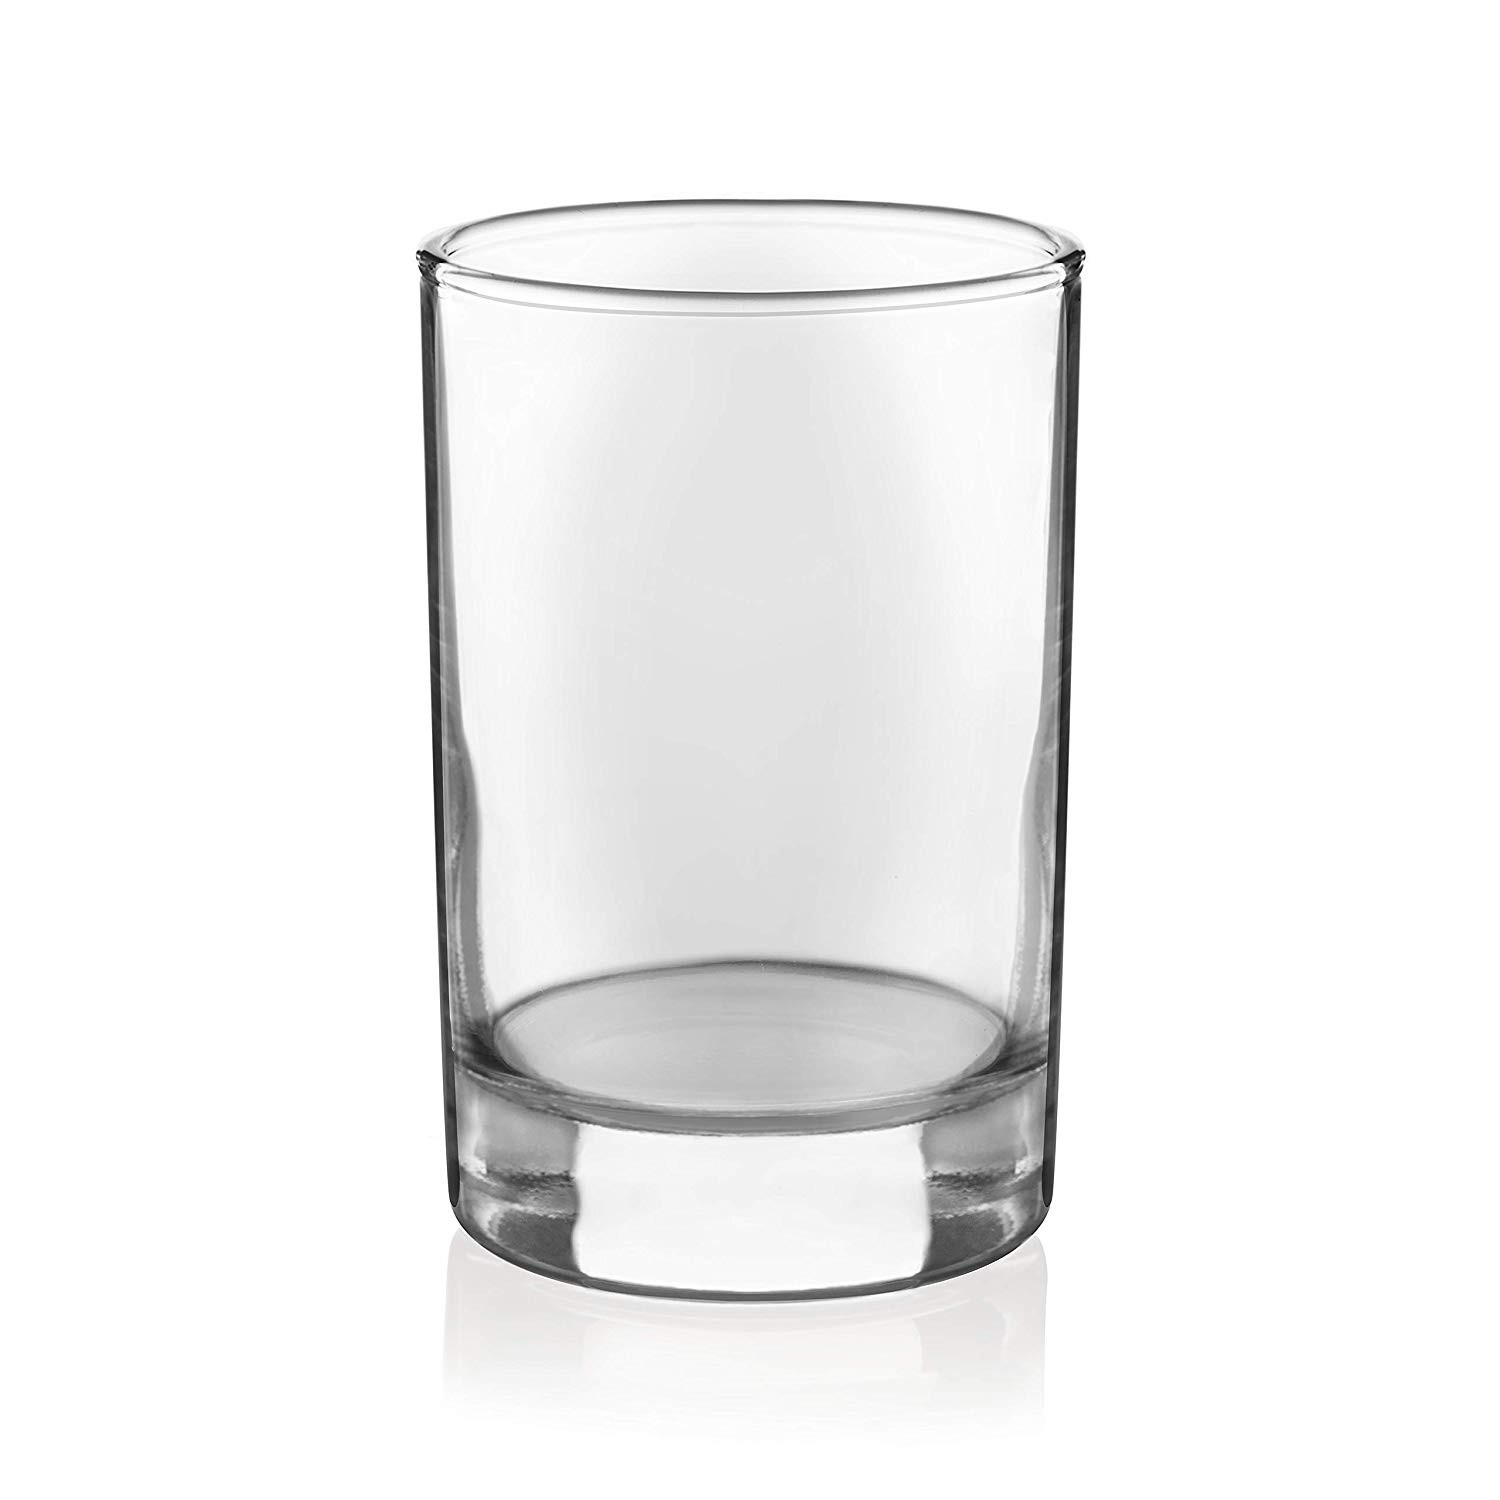 28 Great 6 Inch Square Glass Vase 2024 free download 6 inch square glass vase of amazon com libbey 5 5 ounce heavy base juice glass set of 4 with amazon com libbey 5 5 ounce heavy base juice glass set of 4 mixed drinkware sets